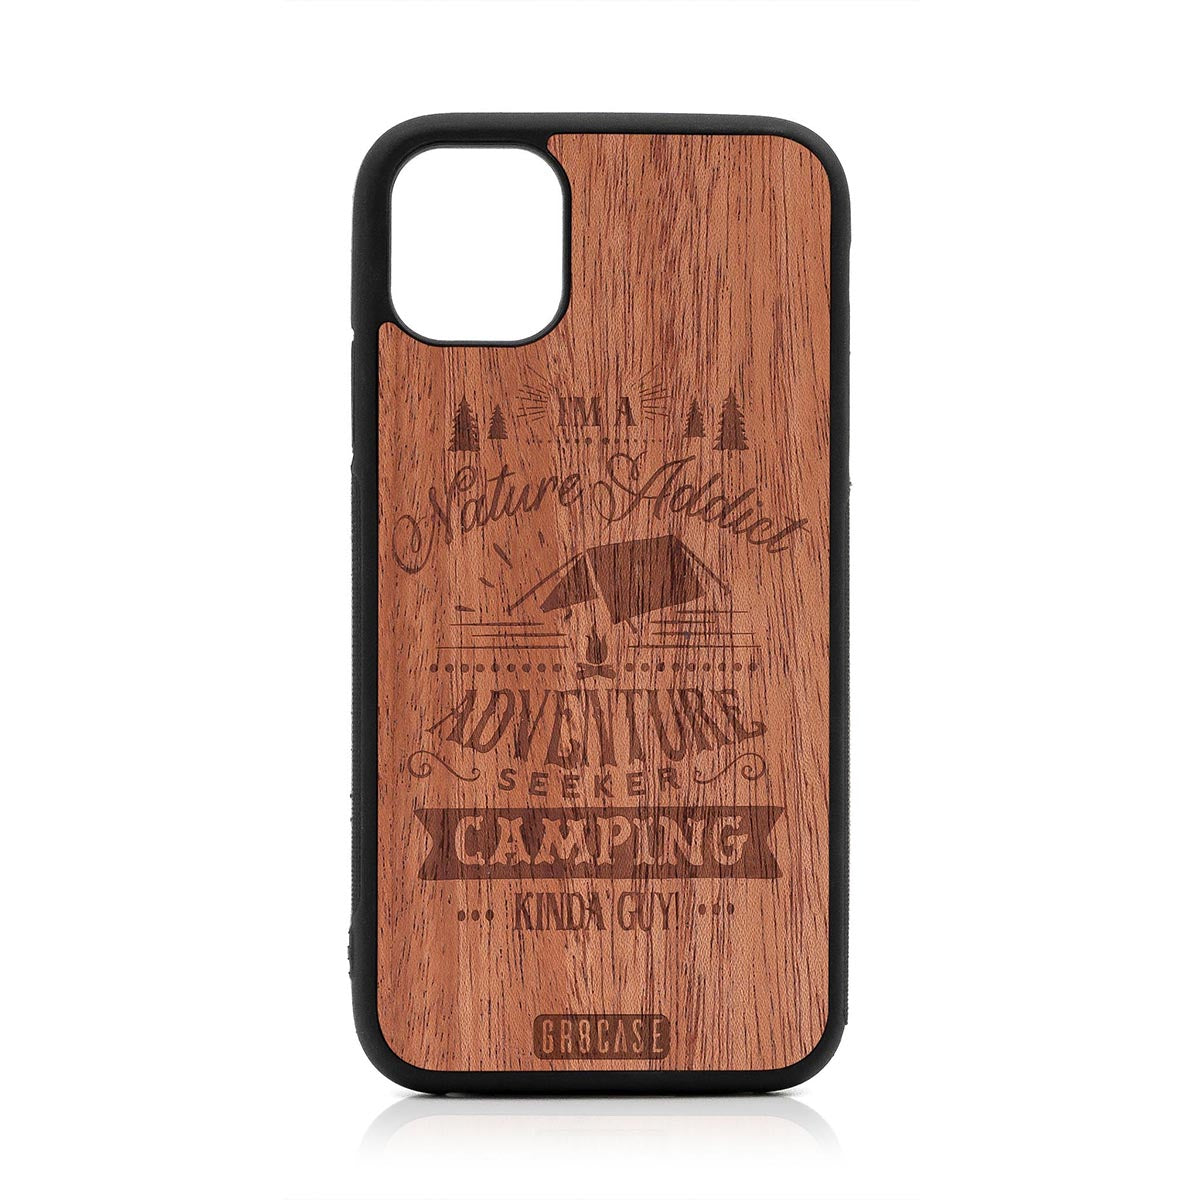 I'm A Nature Addict Adventure Seeker Camping Kinda Guy Design Wood Case For iPhone 11 by GR8CASE